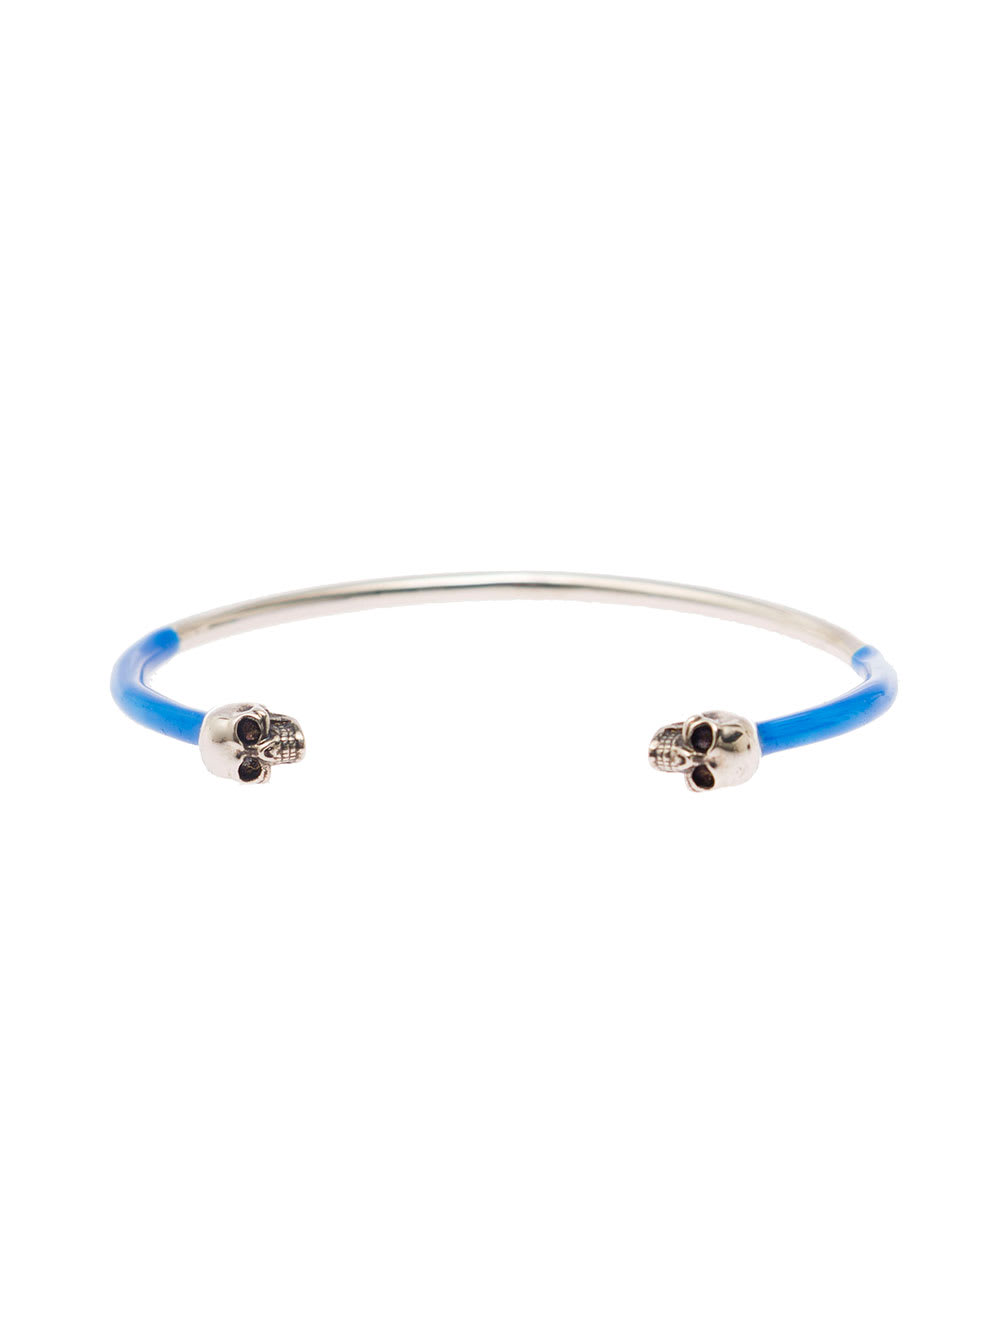 ALEXANDER MCQUEEN AGED SILVER AND BLUE BANGLE BRACELET WITH SULL DETAILS IN BRASS MAN